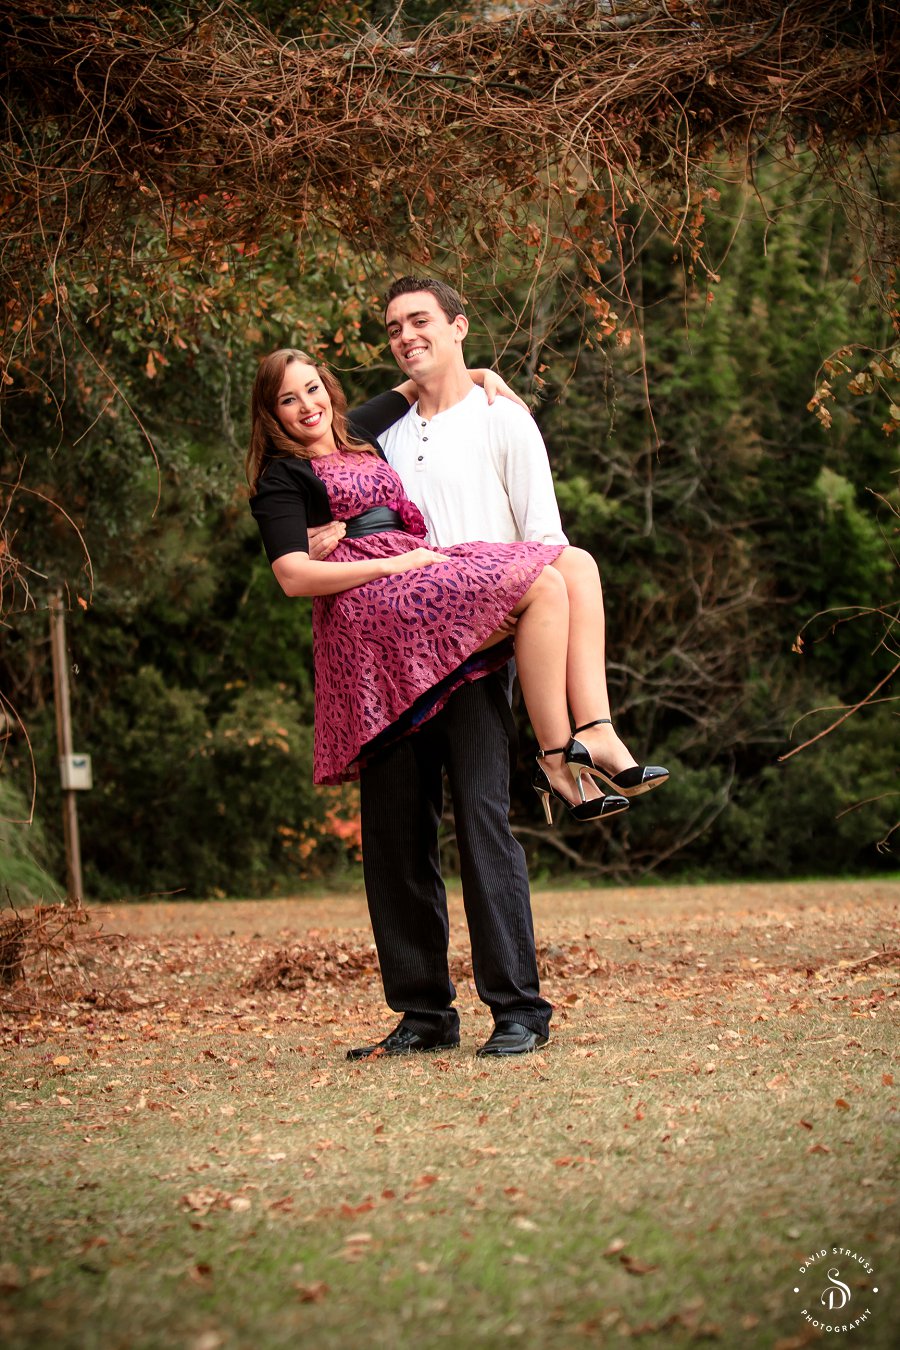 Boone Hall Engagement Pictures - Charleston Wedding Photographer David Strauss - Morgan and Andrew - 5